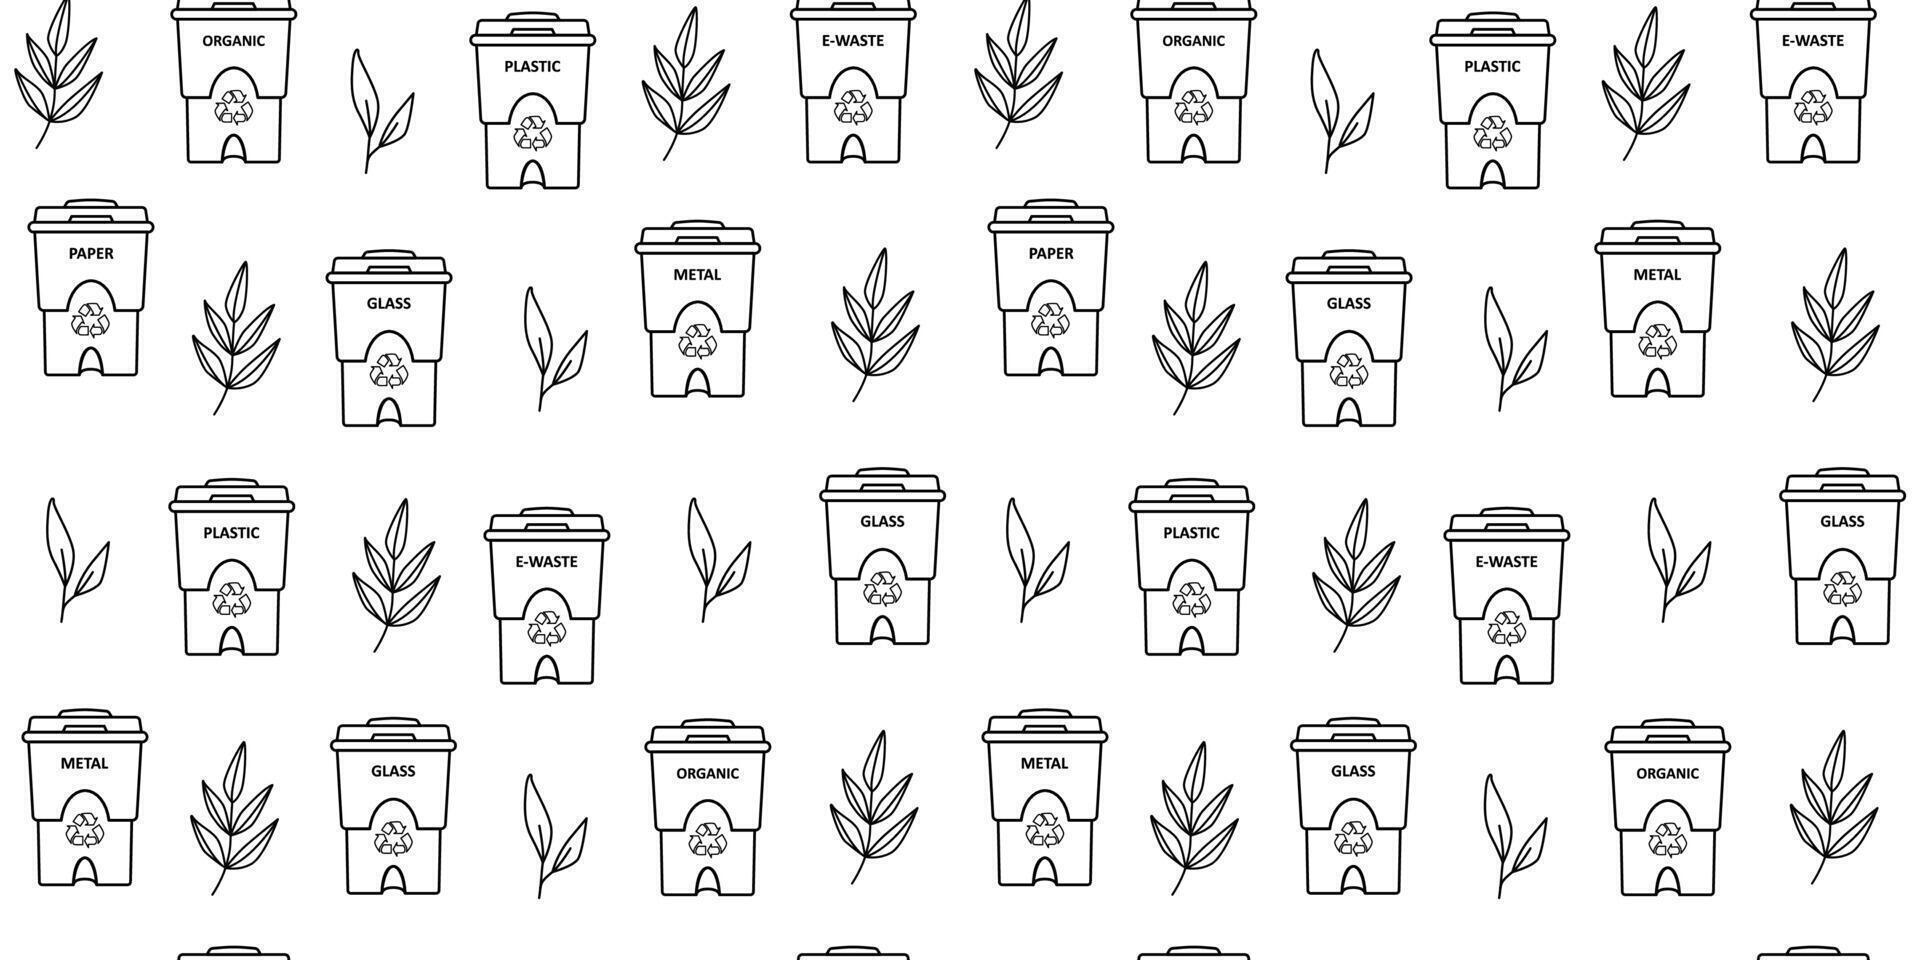 Recycling bins and leaves linear seamless pattern. Ecological and environment protection concept. Garbage and waste sorting. Dustbins for plastic, paper, glass, organic, metal, e-waste.  Background. vector